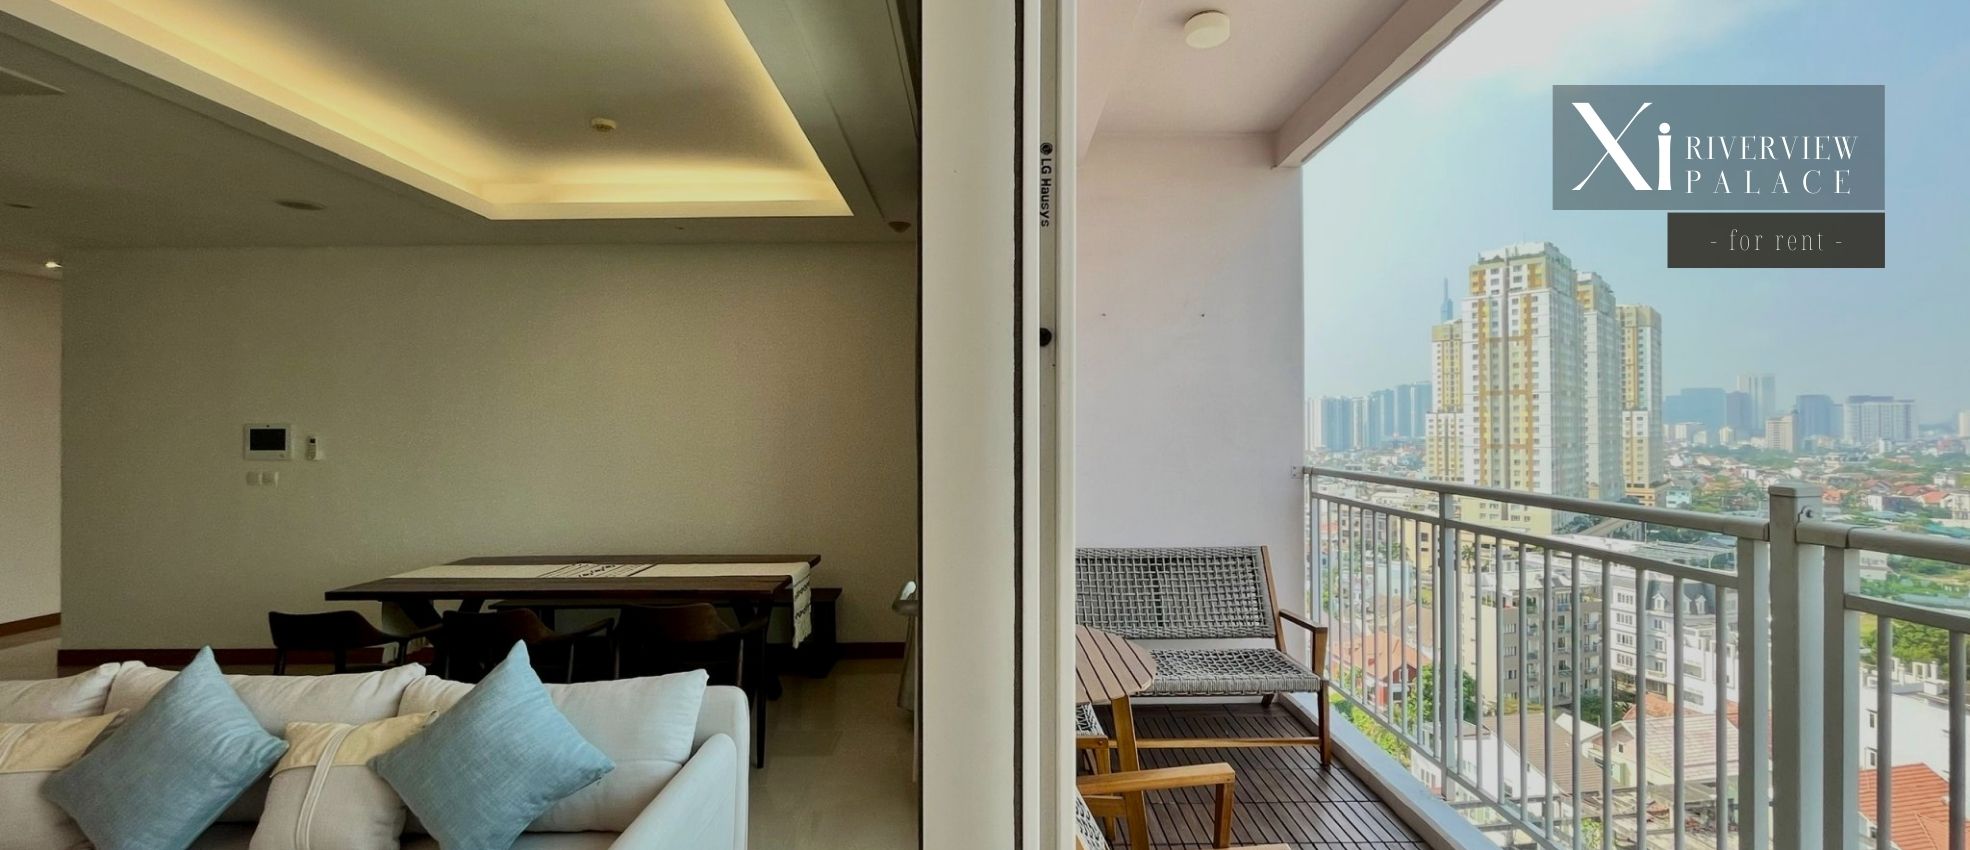 Sun-Drenched Luxury Living: 3-Bedroom Apartment with Panoramic River Views at Xi Riverview Palace